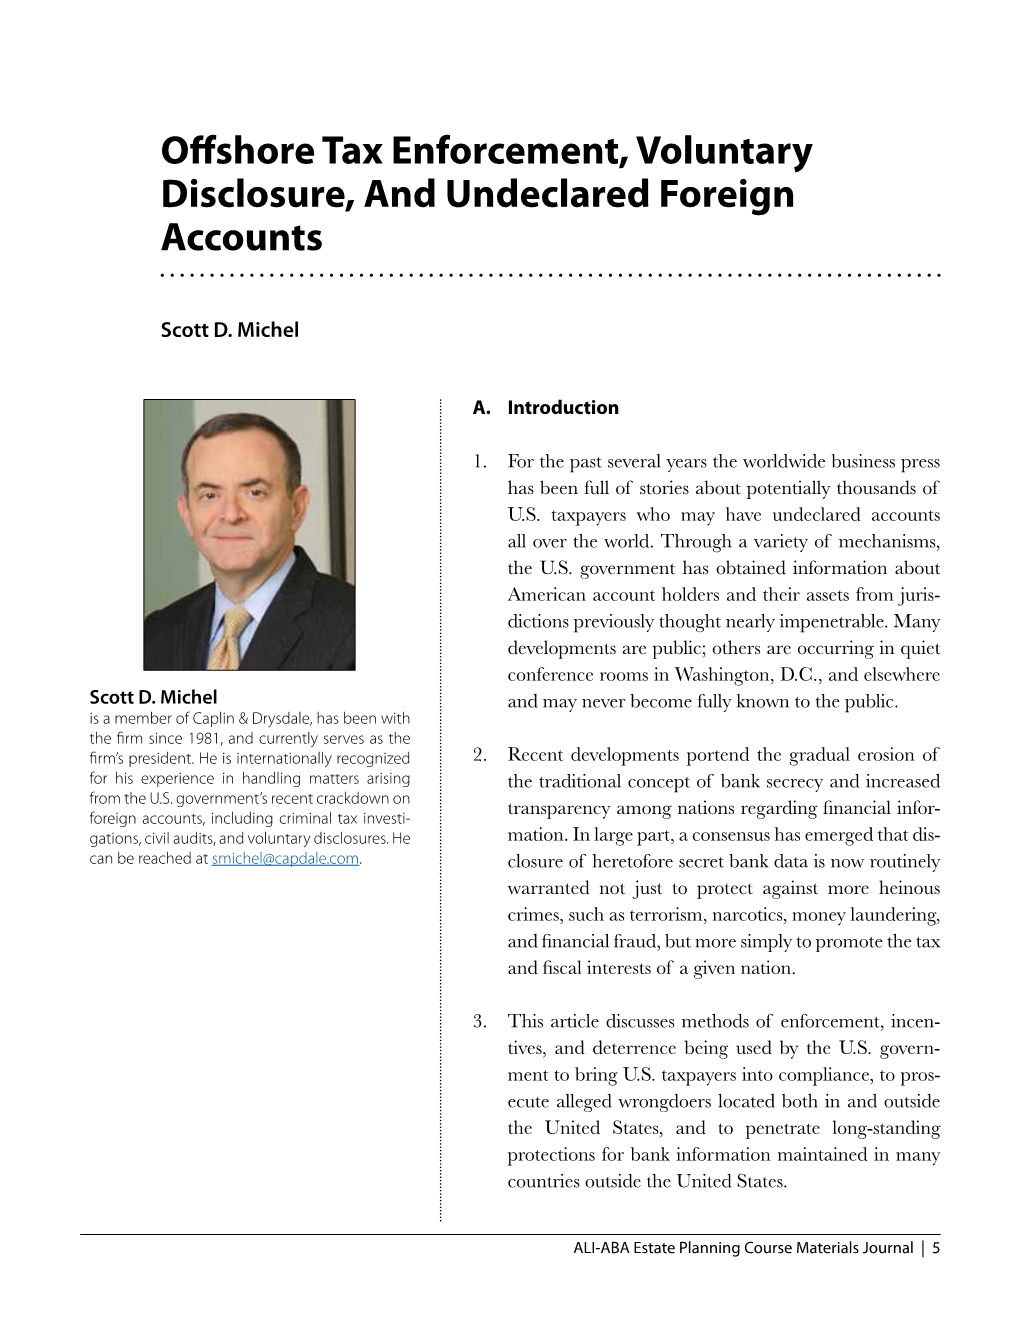 Offshore Tax Enforcement, Voluntary Disclosure, and Undeclared Foreign Accounts